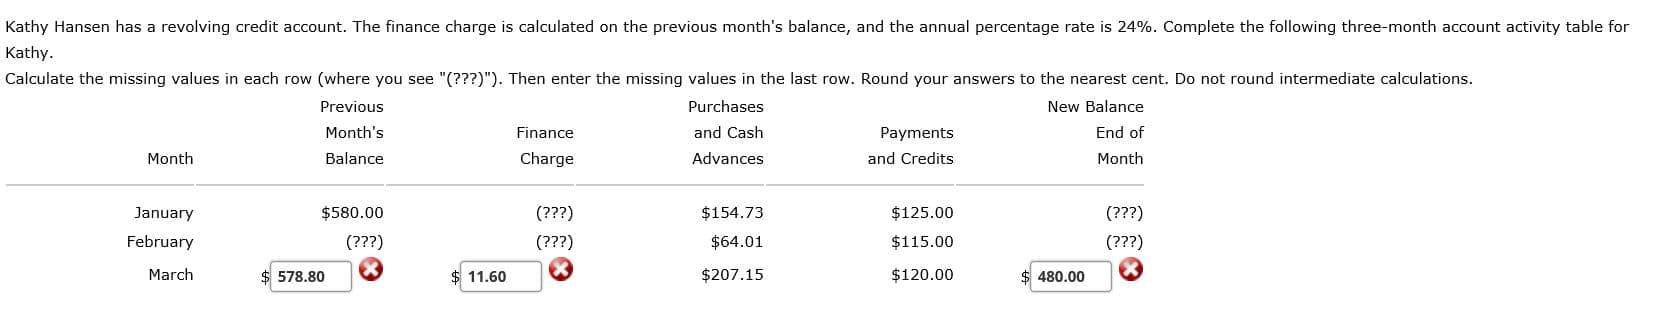 Kathy Hansen has a revolving credit account. The finance charge is calculated on the previous month's balance, and the annual percentage rate is 24%. Complete the following three-month account activity table for
Kathy.
Calculate the missing values in each row (where you see "(???)"). Then enter the missing values in the last row. Round your answers to the nearest cent. Do not round intermediate calculations.
Previous
Purchases
New Balance
Month's
Finance
and Cash
Payments
End of
Month
Balance
Charge
Advances
and Credits
Month
January
$580.00
(???)
$154.73
$125.00
(???)
February
(???)
(???)
$64.01
$115.00
(???)
March
578.80
$ 11.60
$207.15
$120.00
480.00
